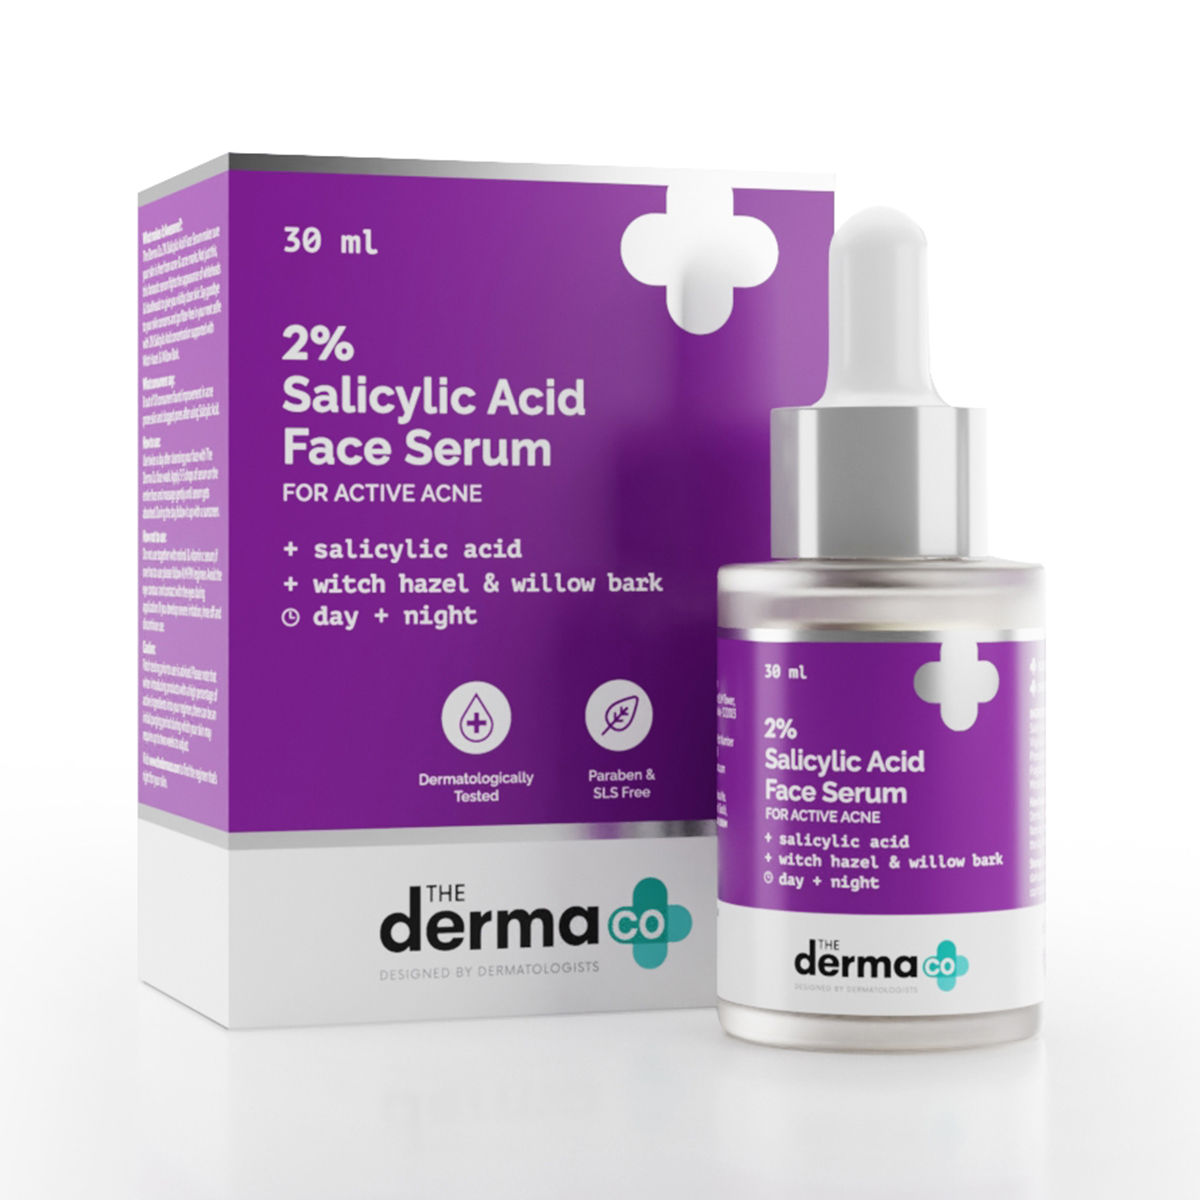 The Derma Co. 2% Salicylic Acid Face Serum For Active Acne